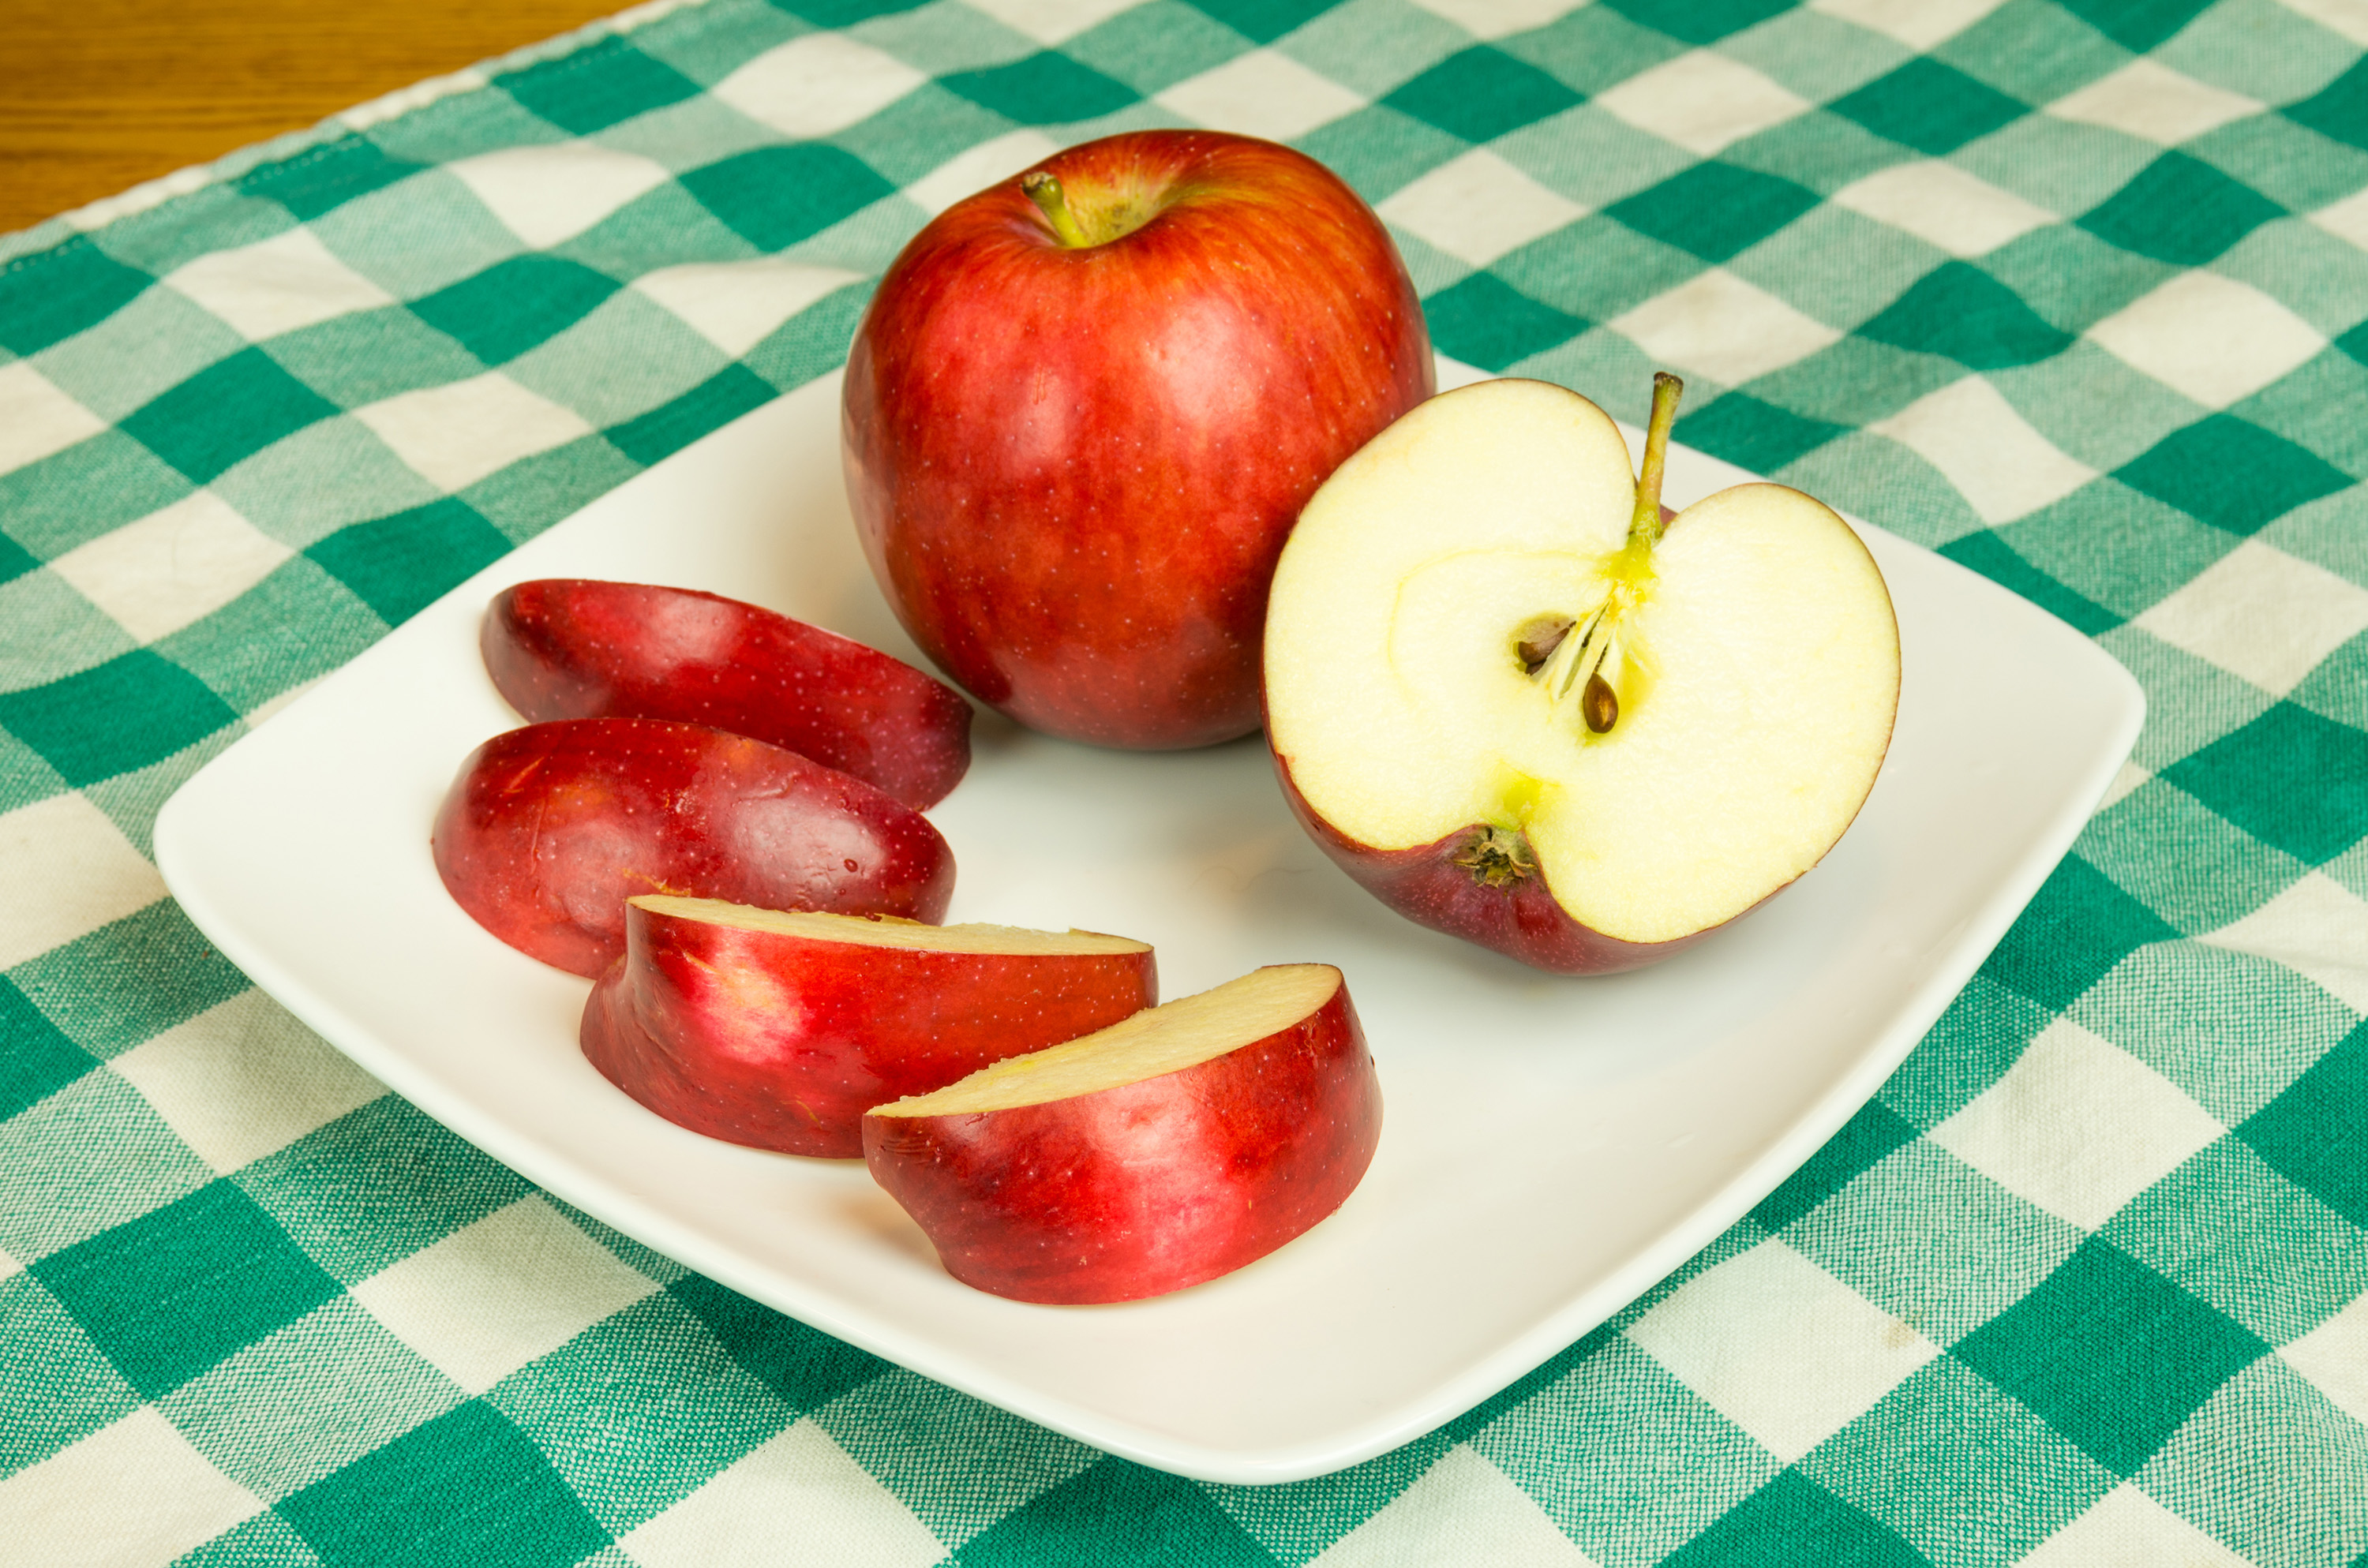 An A-to-Z Guide to Apples, New England's Most Iconic Fall Fruit